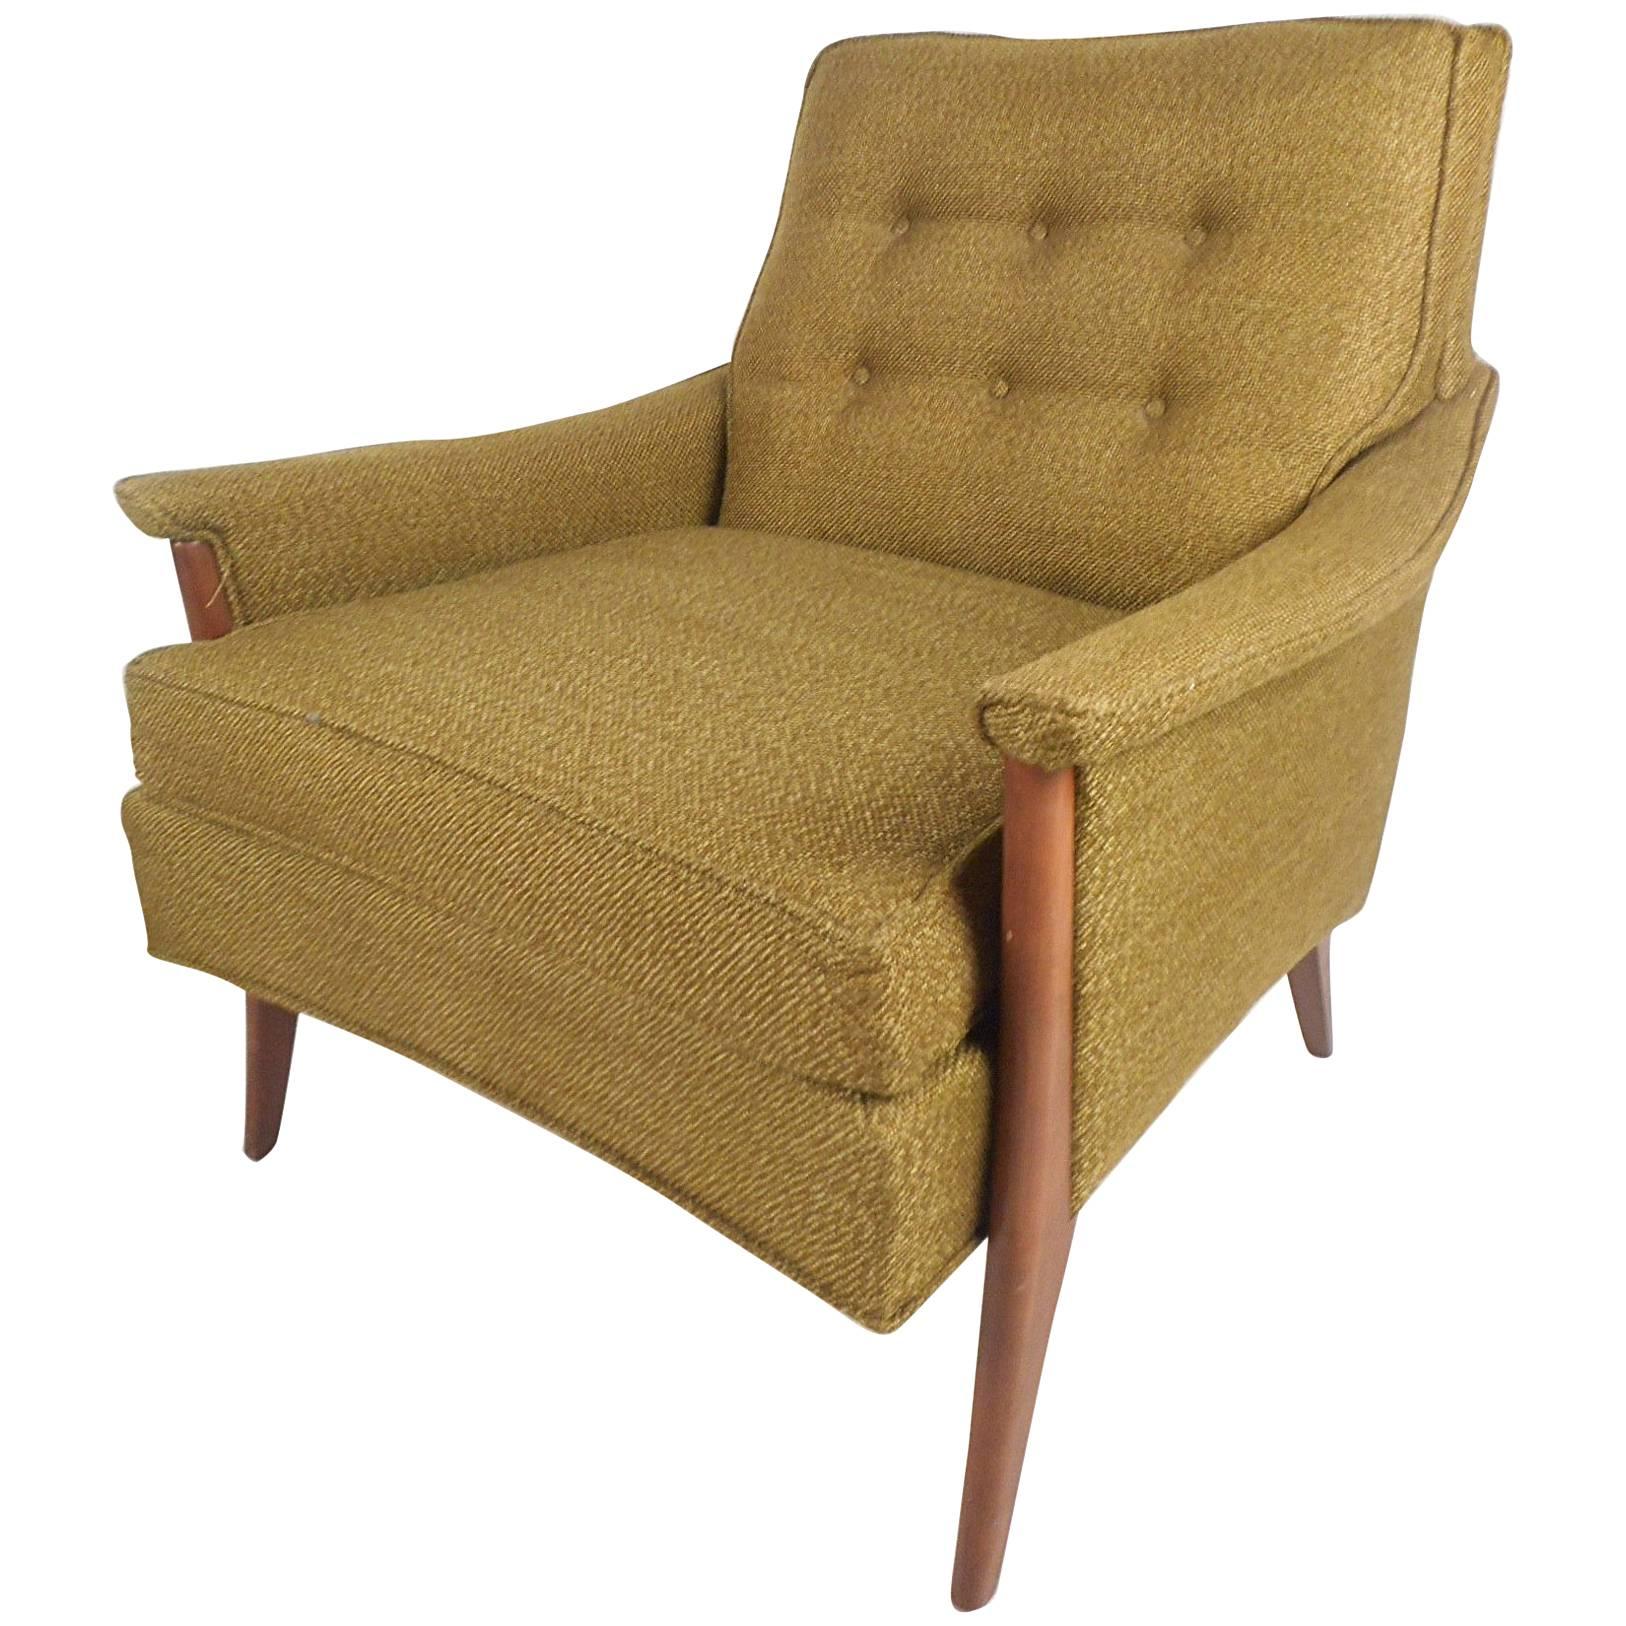 Mid-Century Modern Tufted Lounge Chair by Kroehler Mfg Co